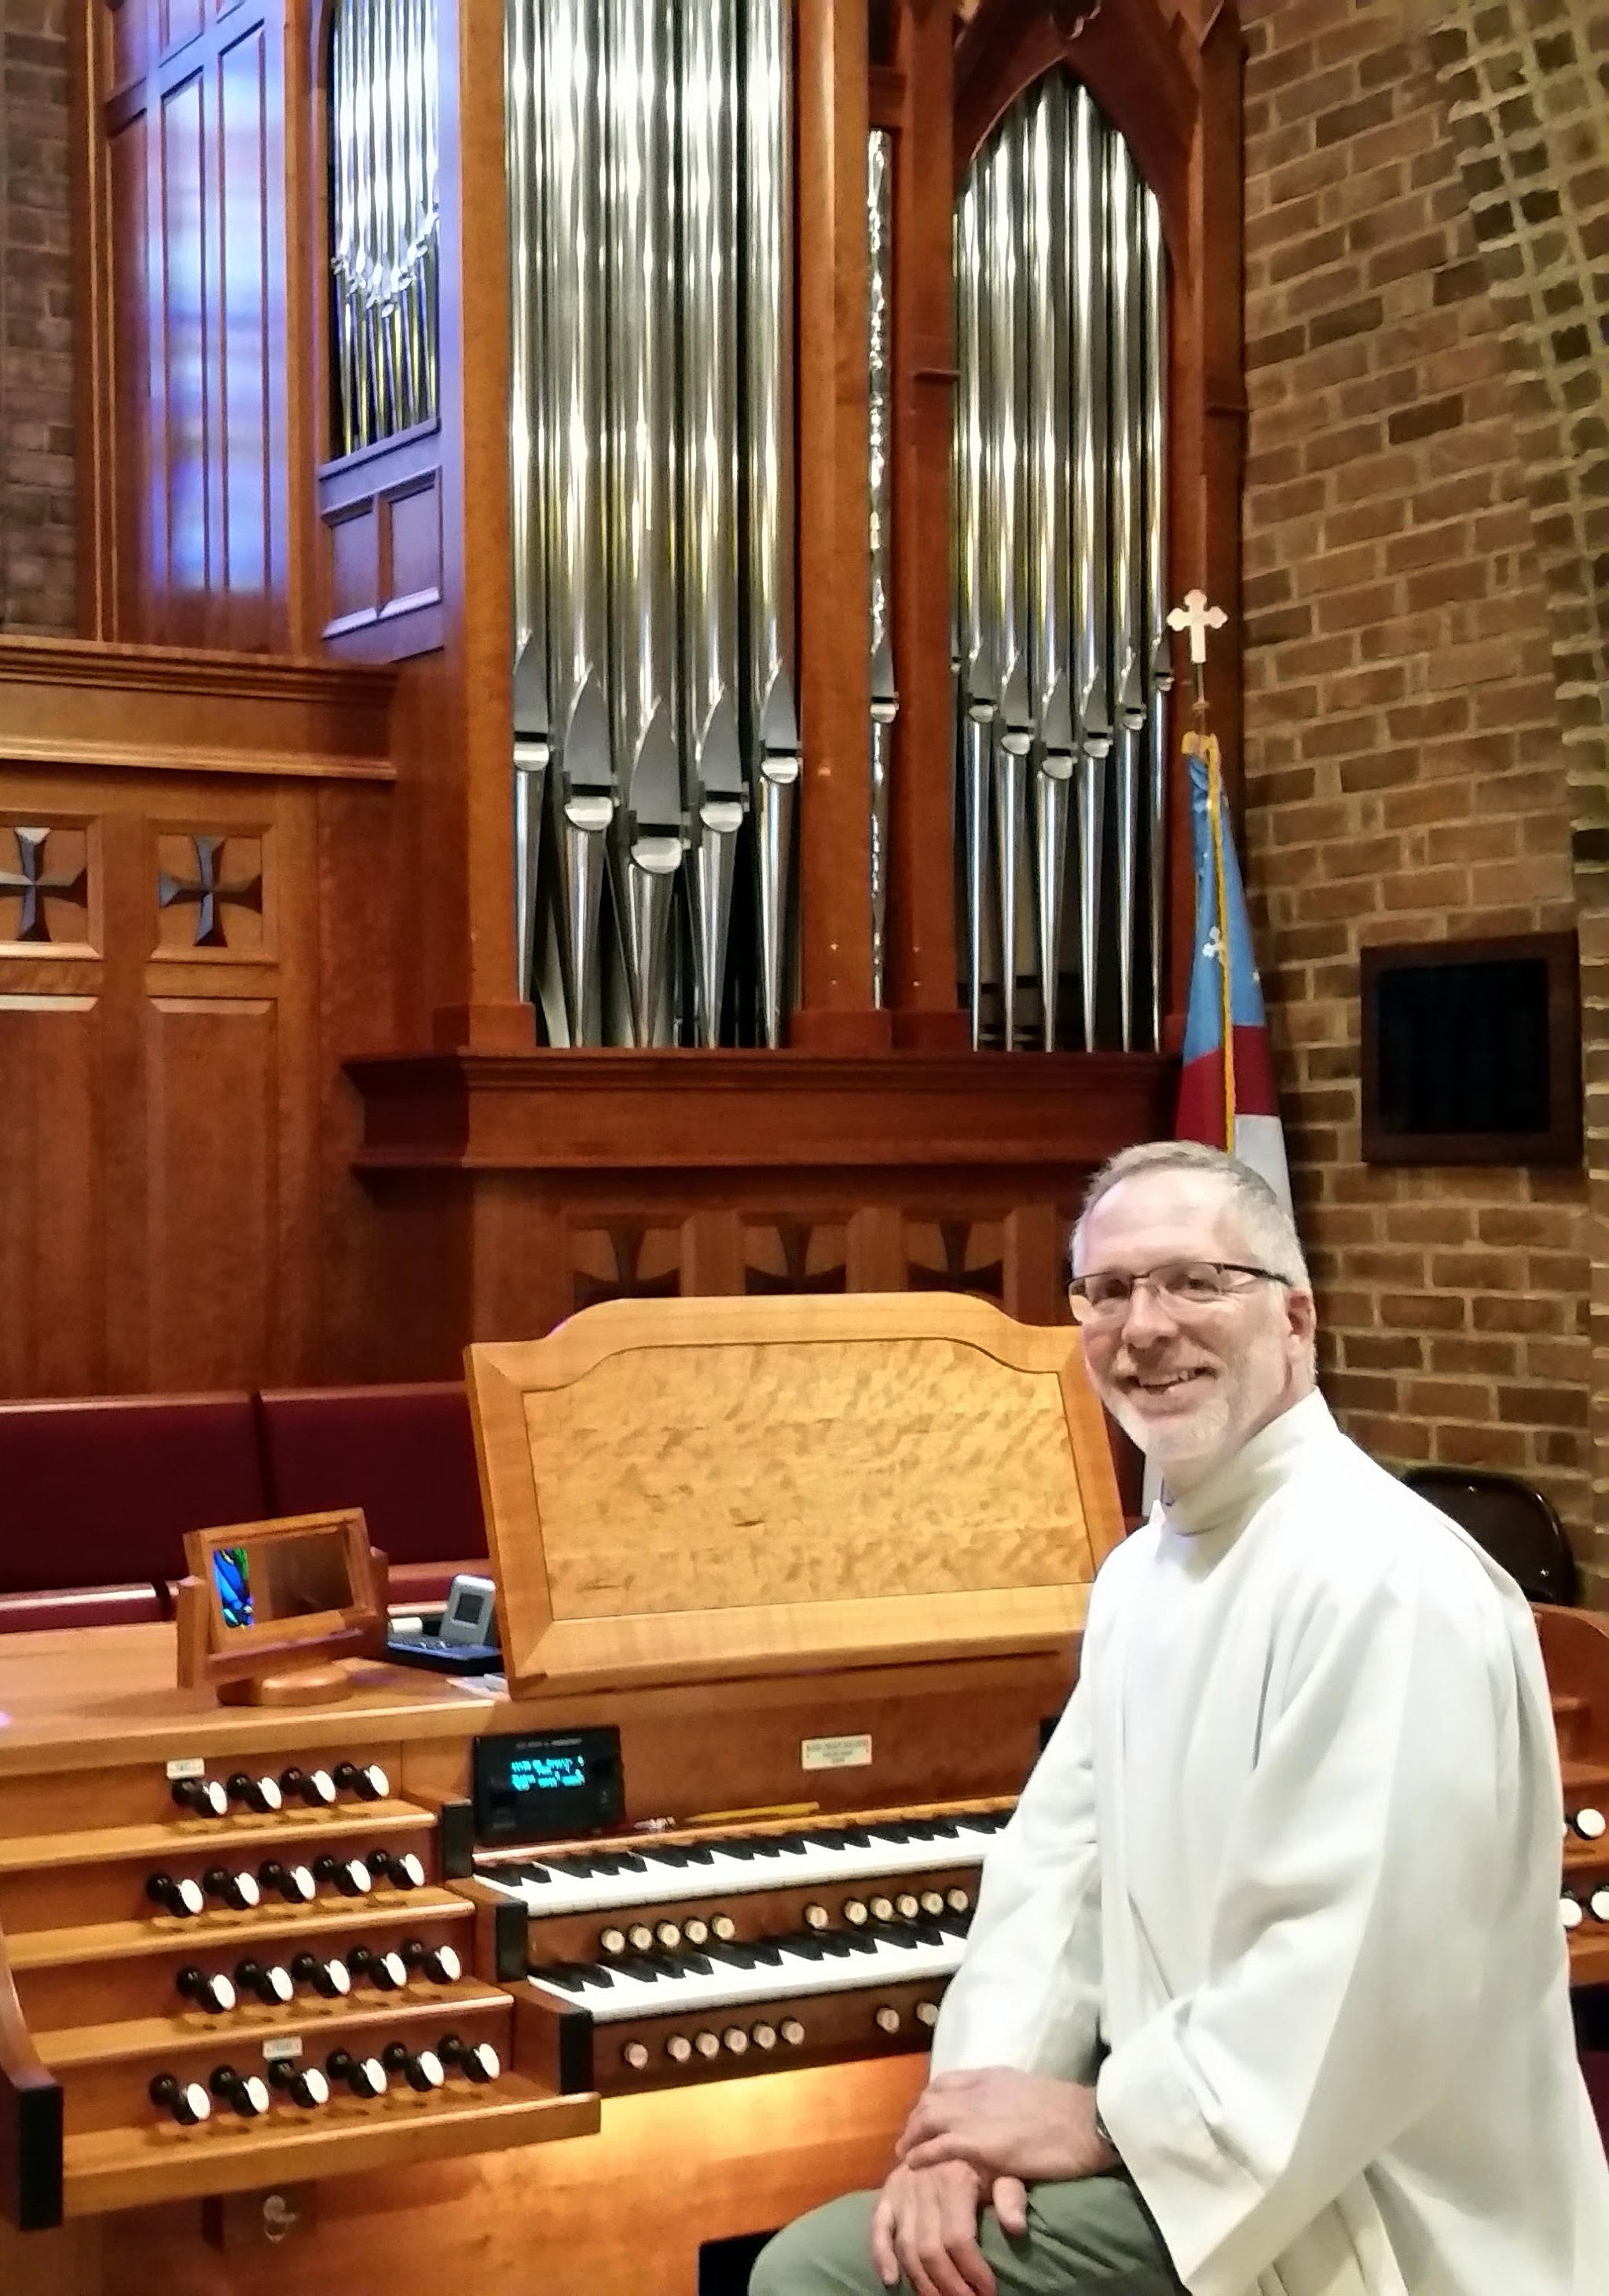 Music Live with Lunch features organist Paul Roy at noon, Tuesday, Feb. 21, in St. Luke’s Episcopal Church. Submitted photo